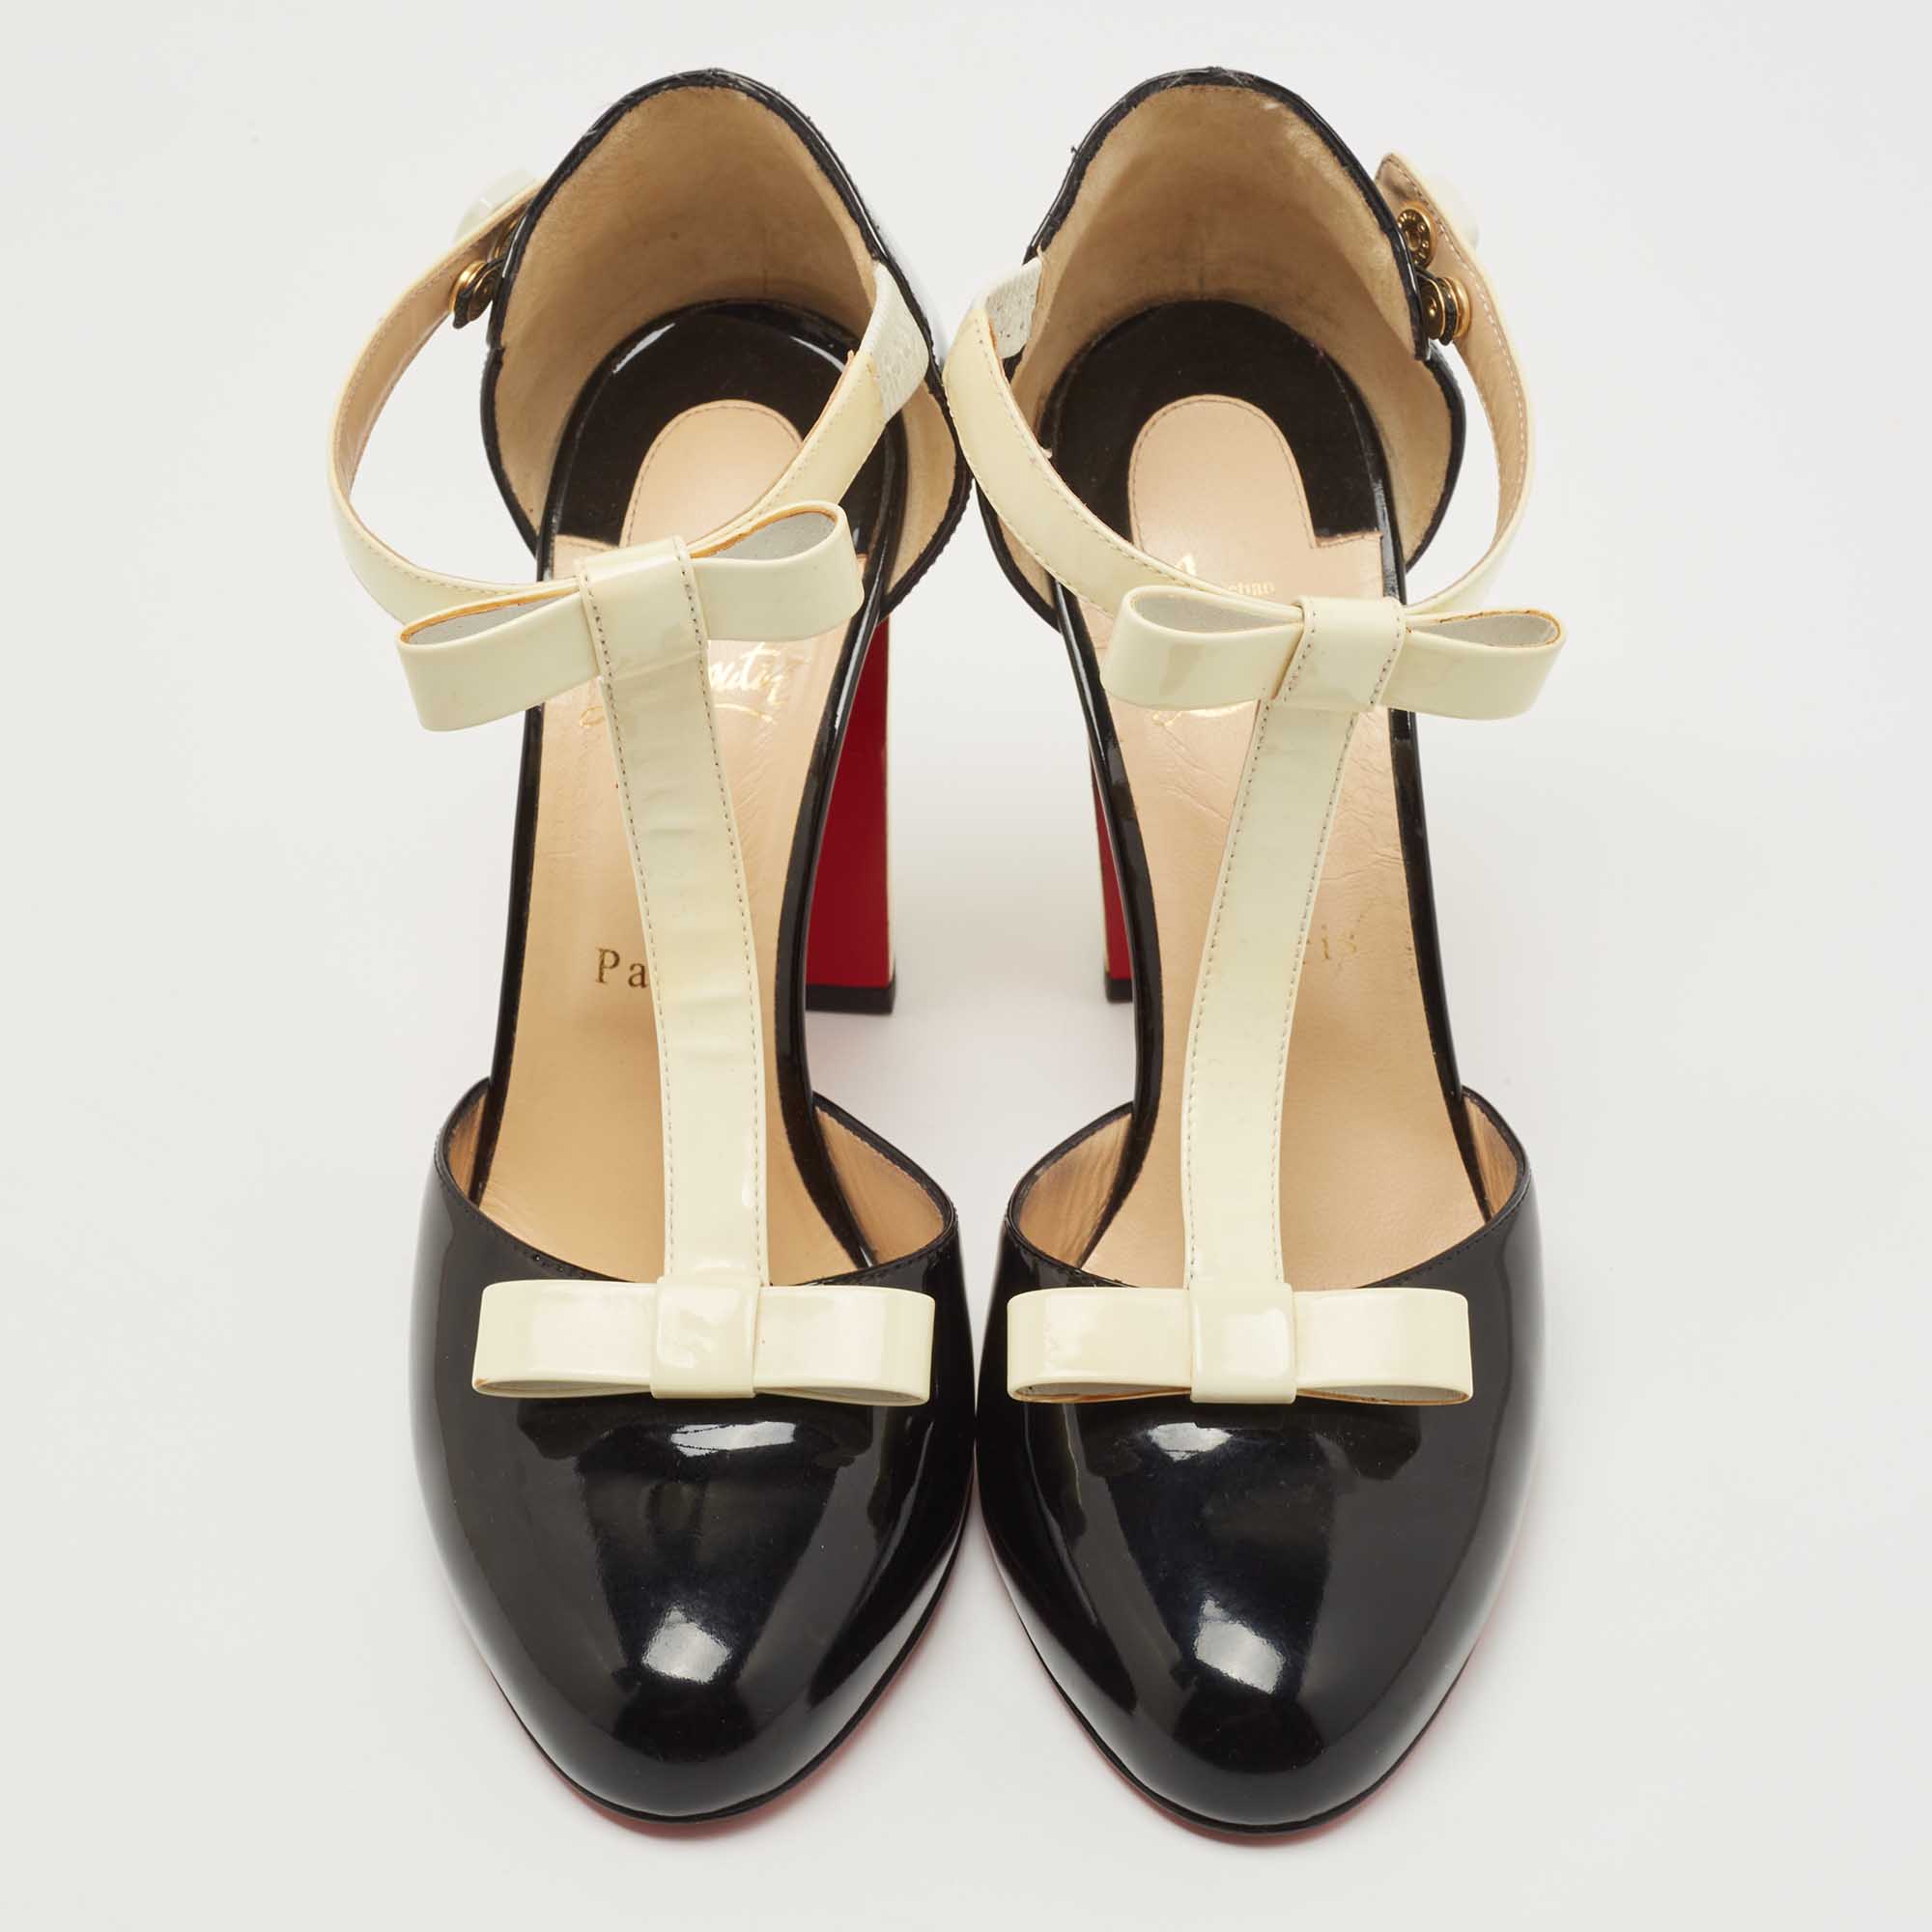 Christian Louboutin Black/Off White Patent Leather T Strap Pumps Size 40.5